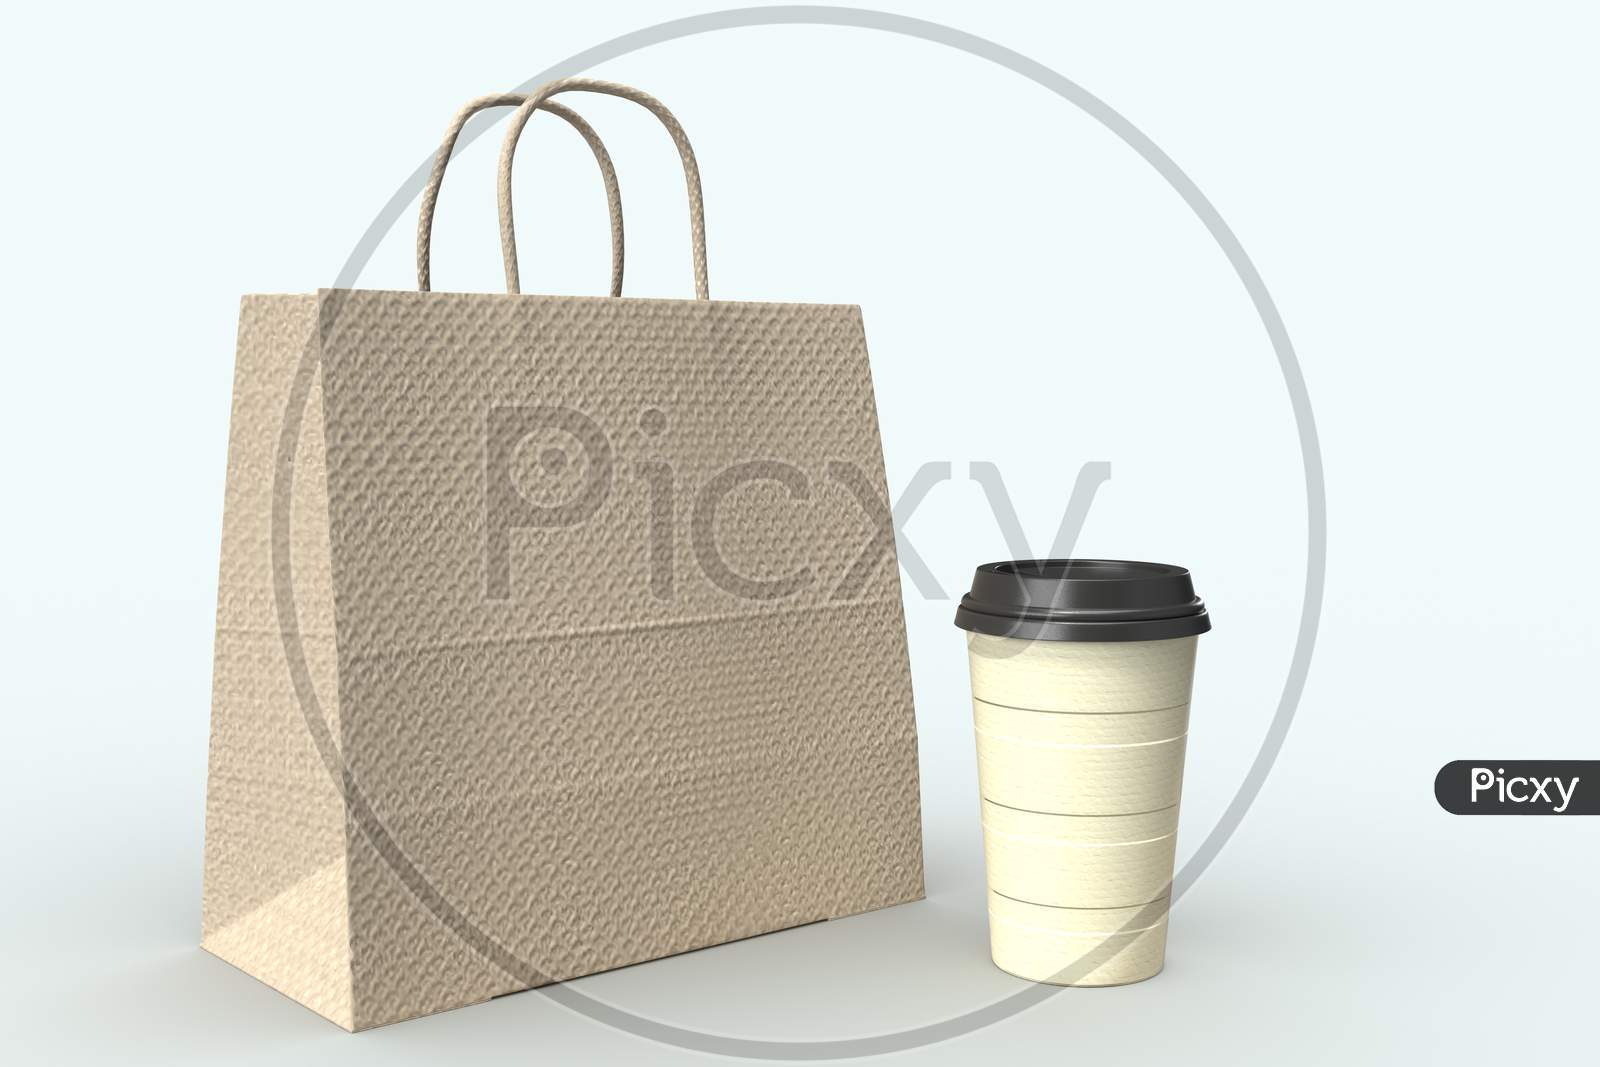 Realistic Looking Shopping Bag And Disposable Coffee Cup With Blank Mockups Isolated In White Background, 3D Rendering